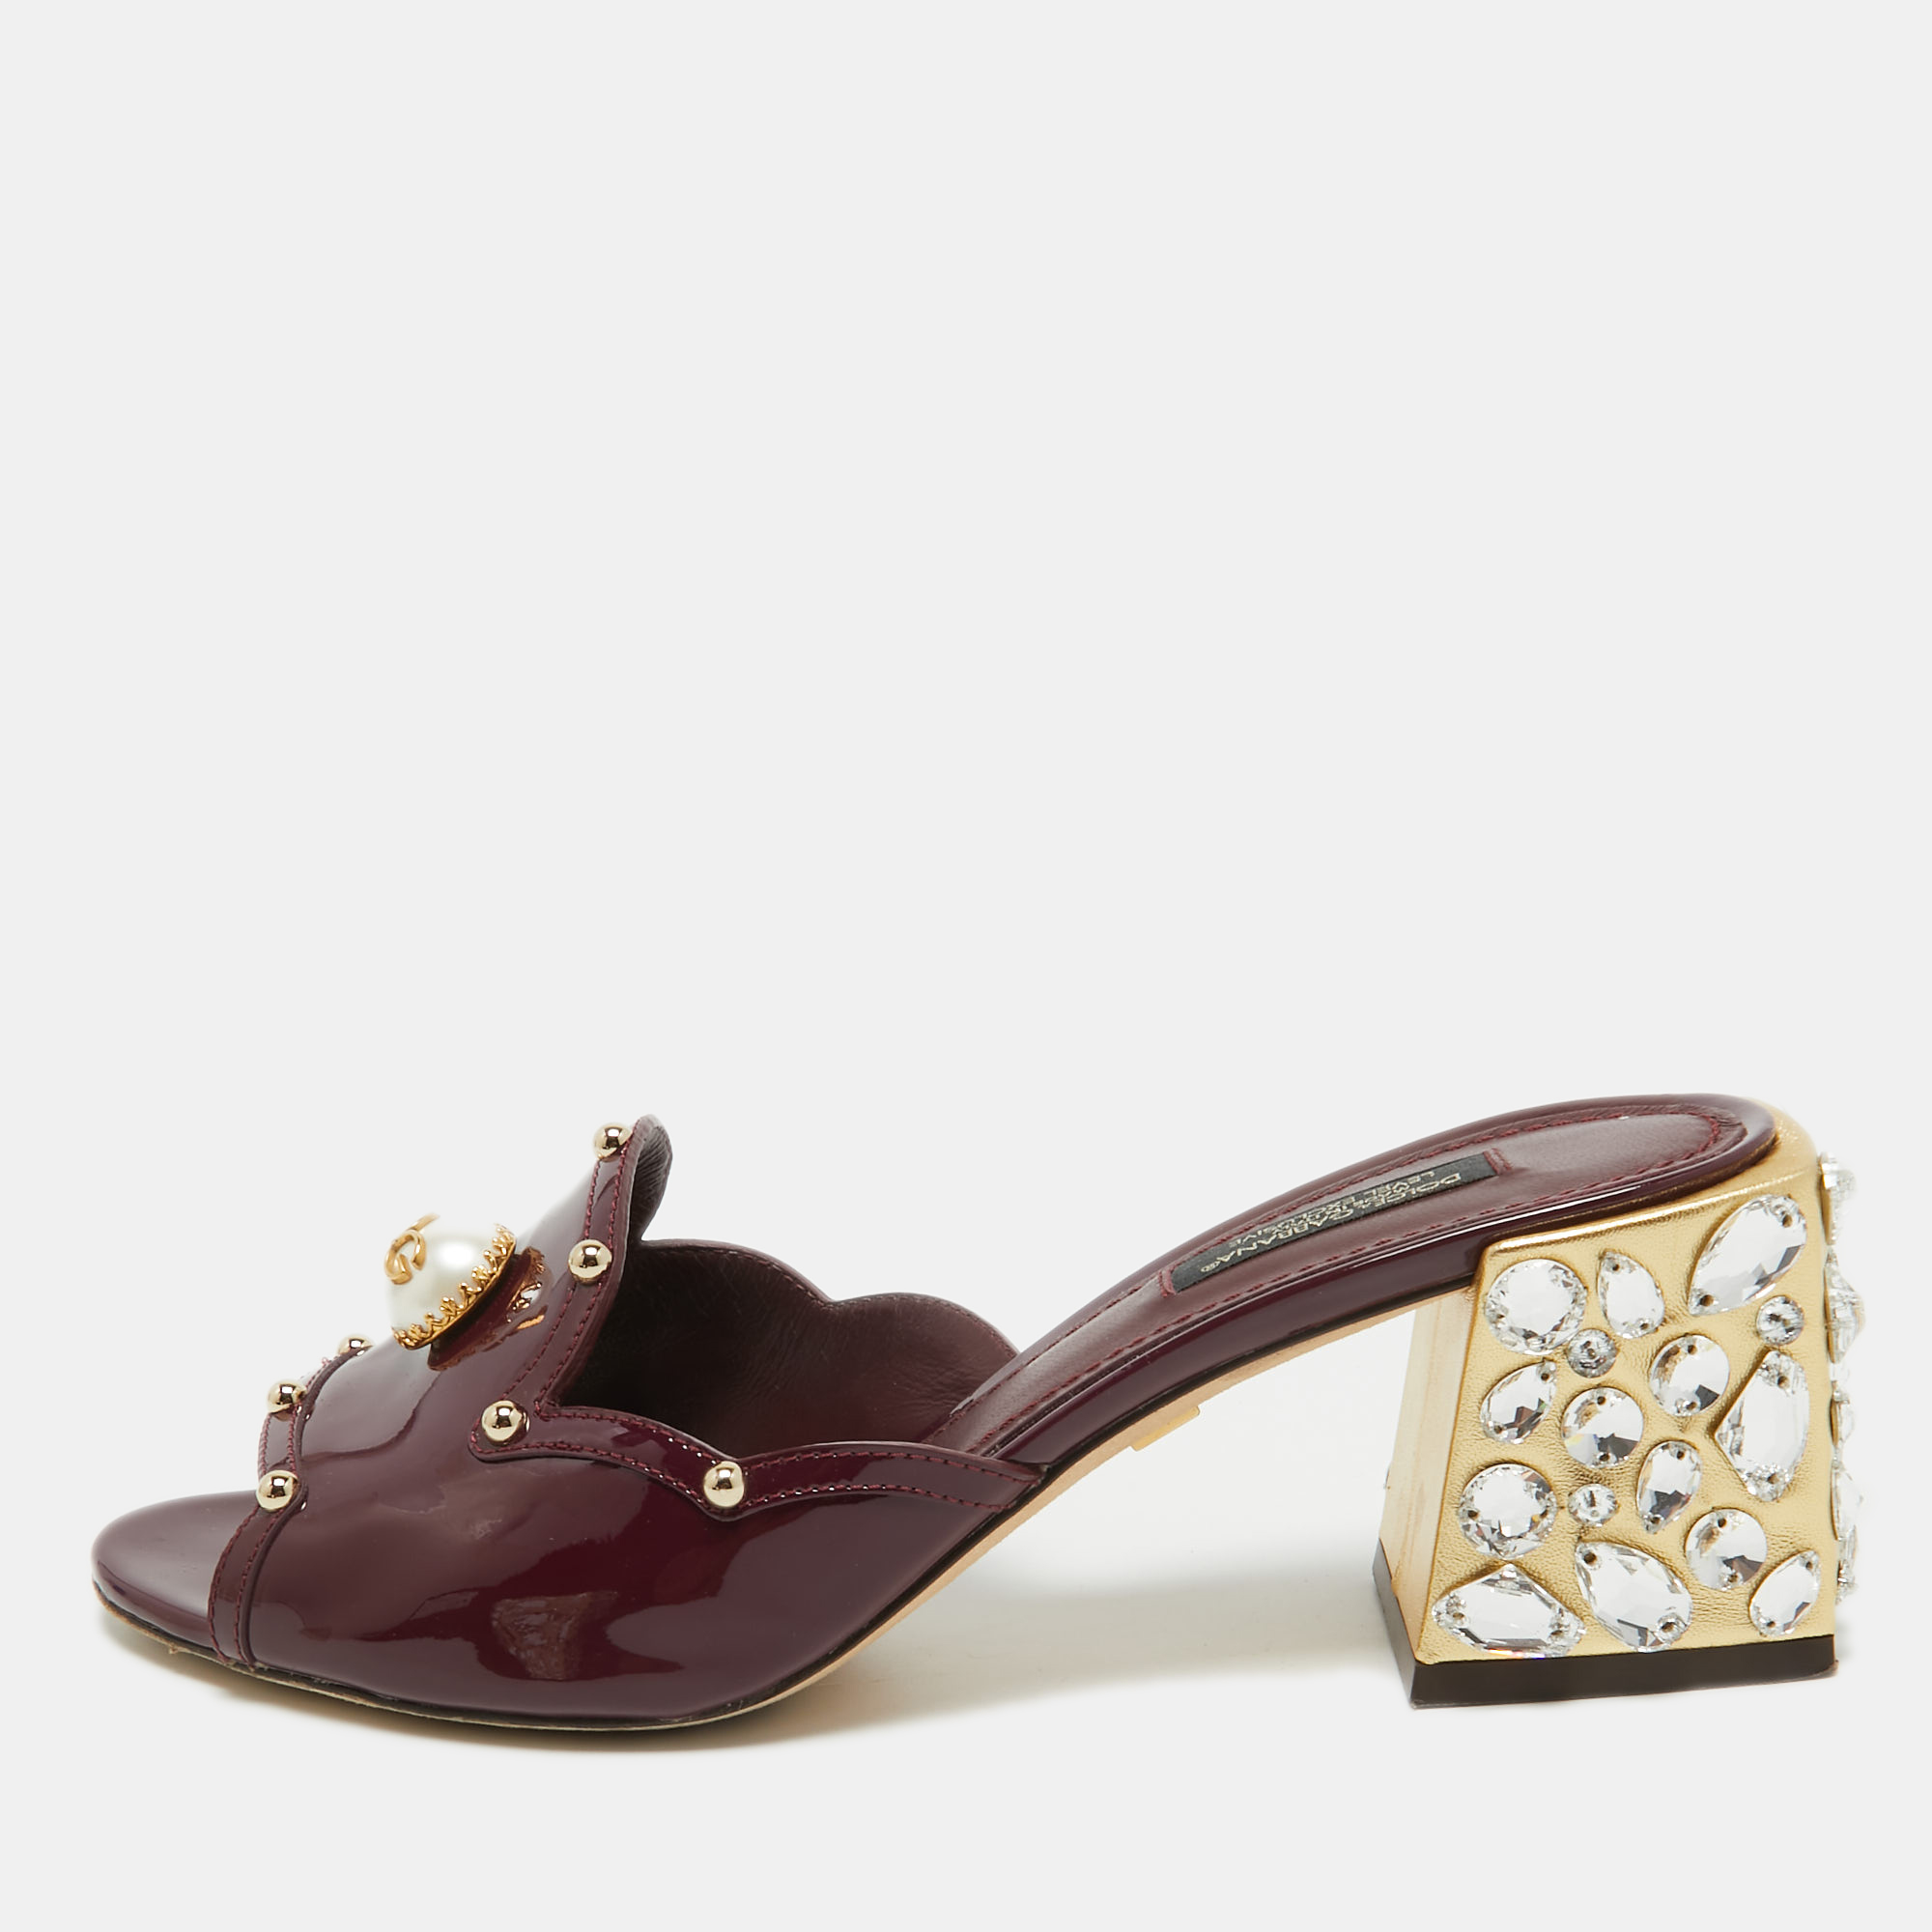 Pre-owned Dolce & Gabbana Burgundy Patent Leather Crystal Embellishment Block Heel Mules Size 37